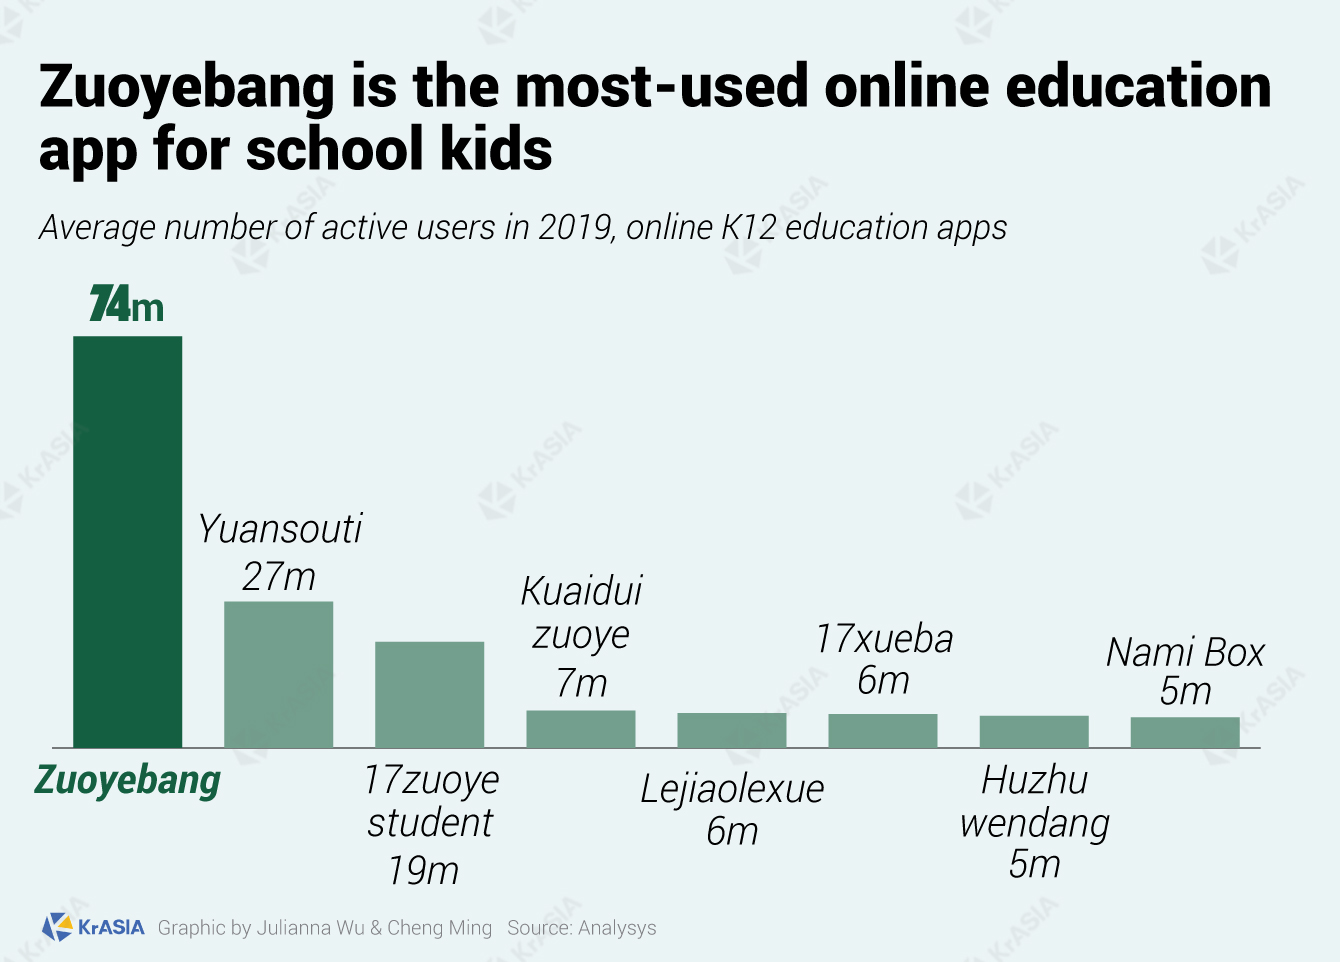 Zuoyebang is the most-used edtech app for school kids